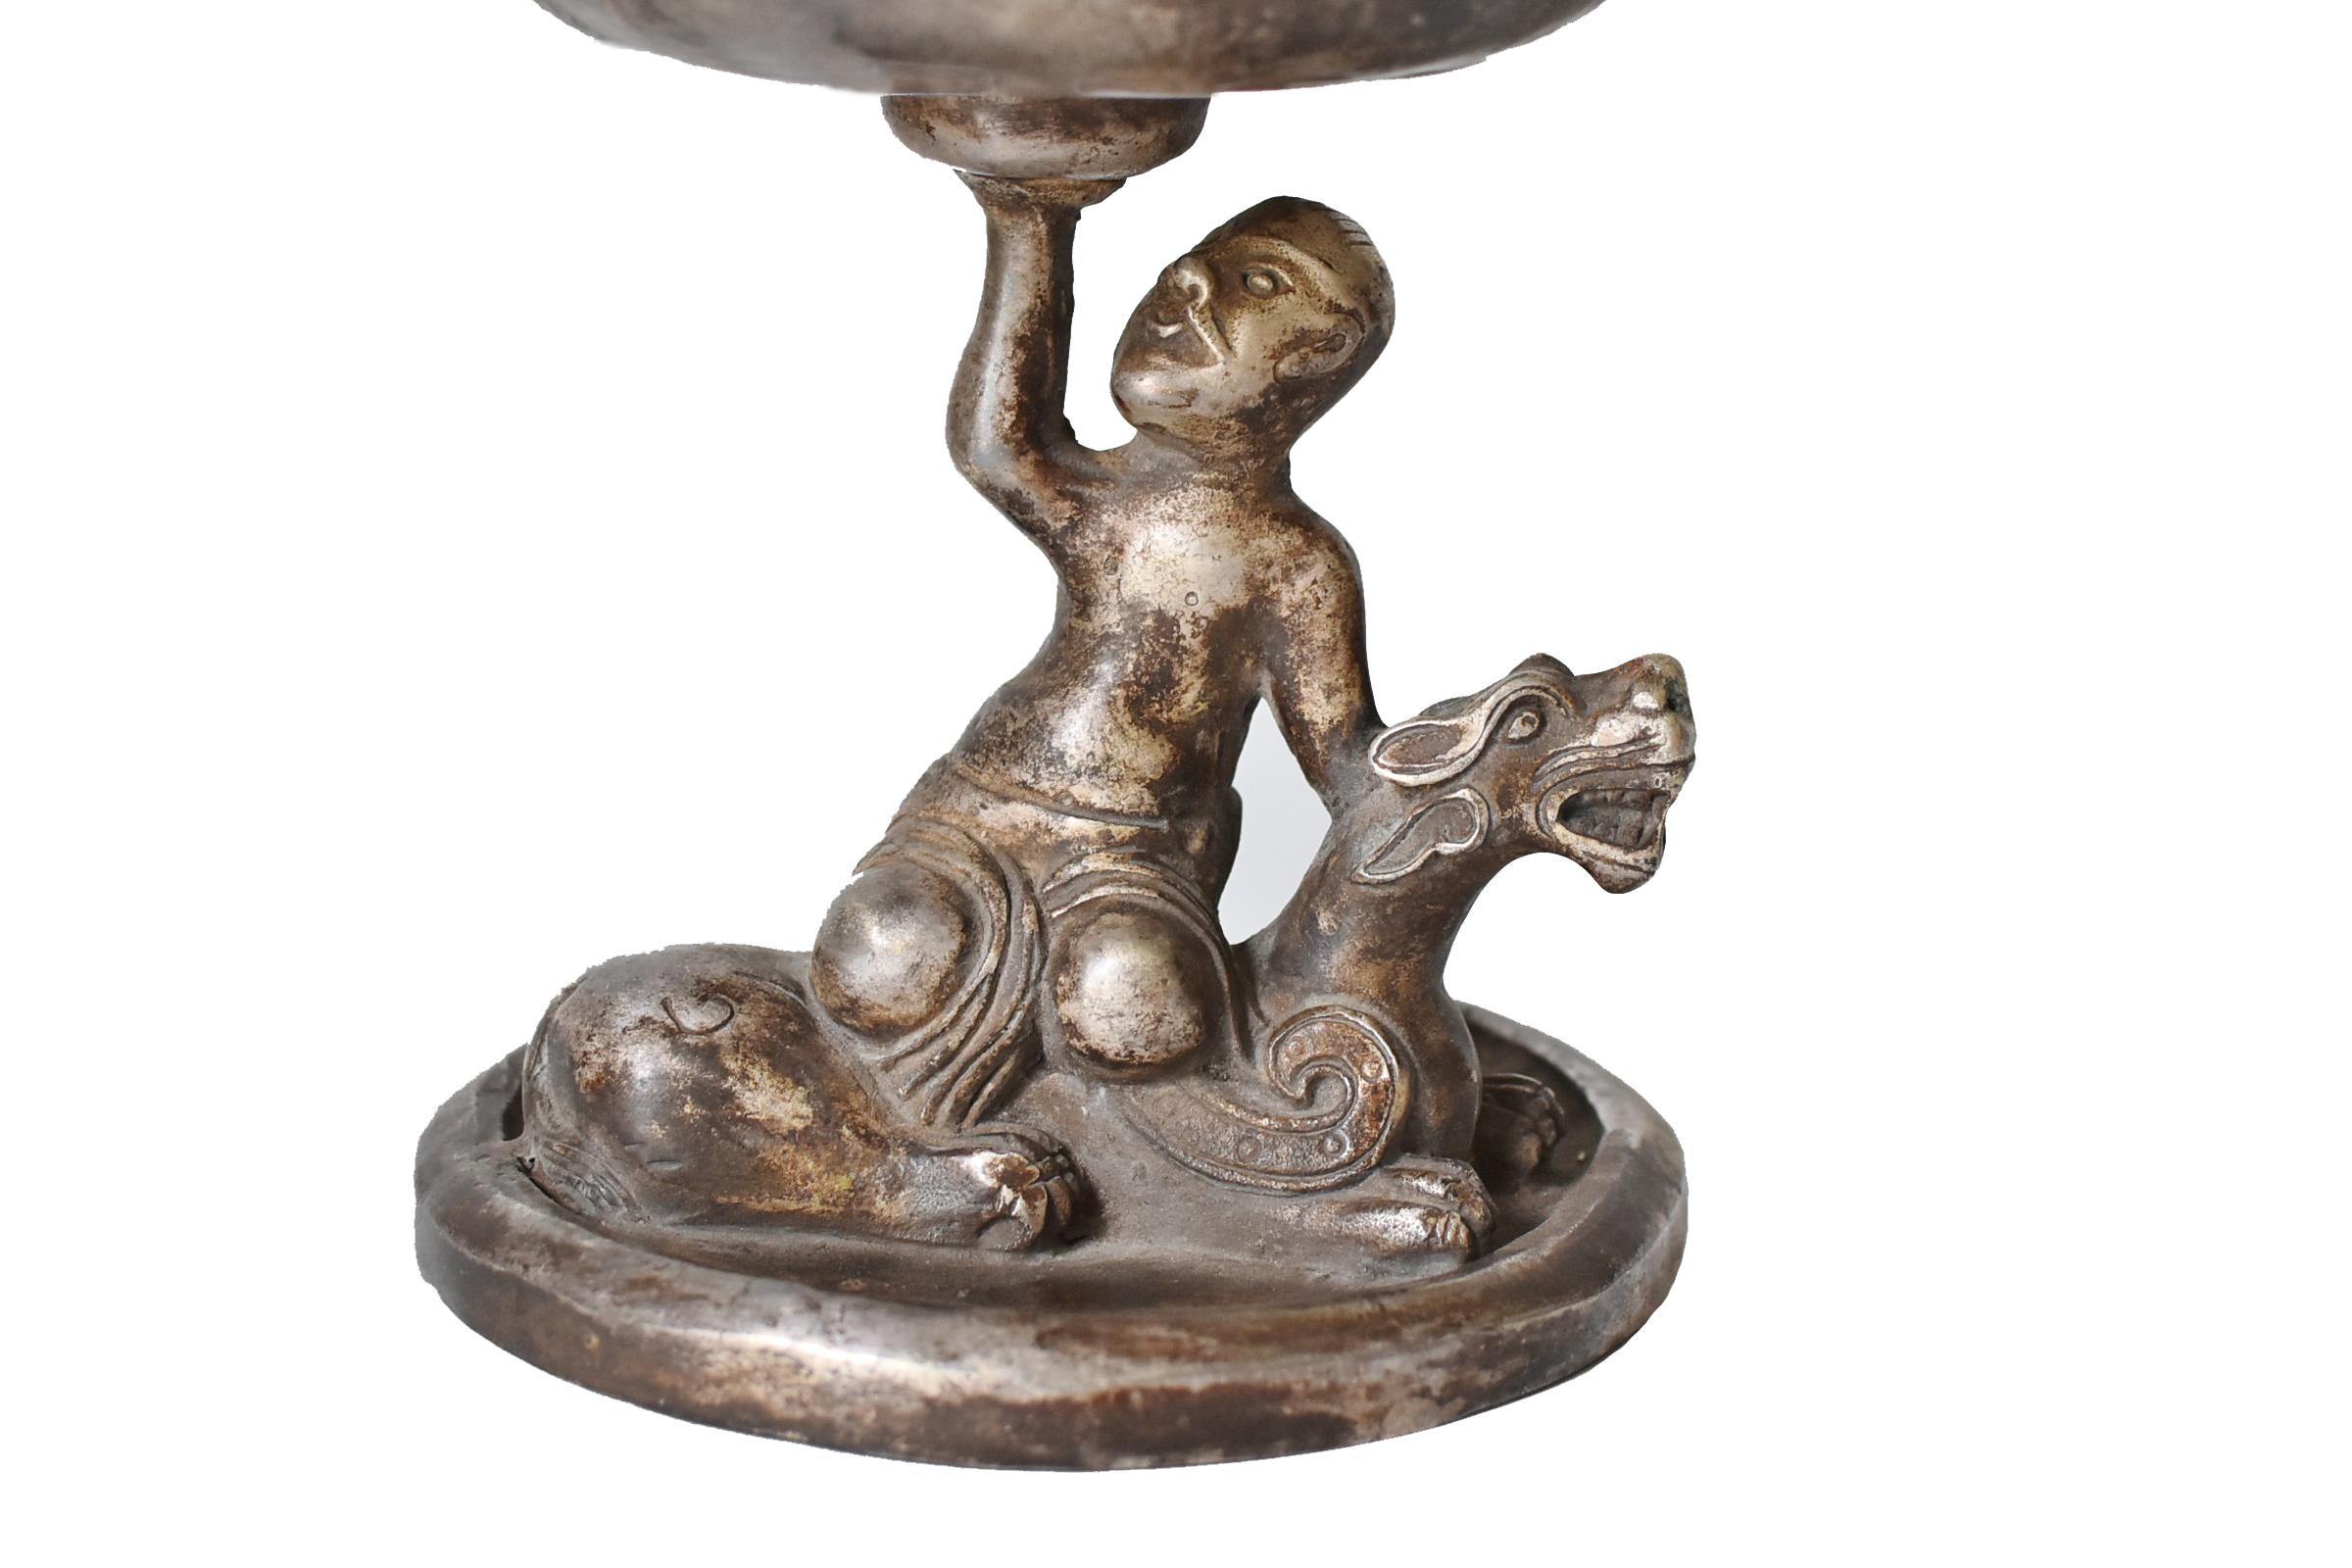 A beautiful silvered bronze 20th century Bo Shan incense burner featuring a boy riding on a dragon. The lid of the burner resembles cloud covered summit of mountain, hence the name 